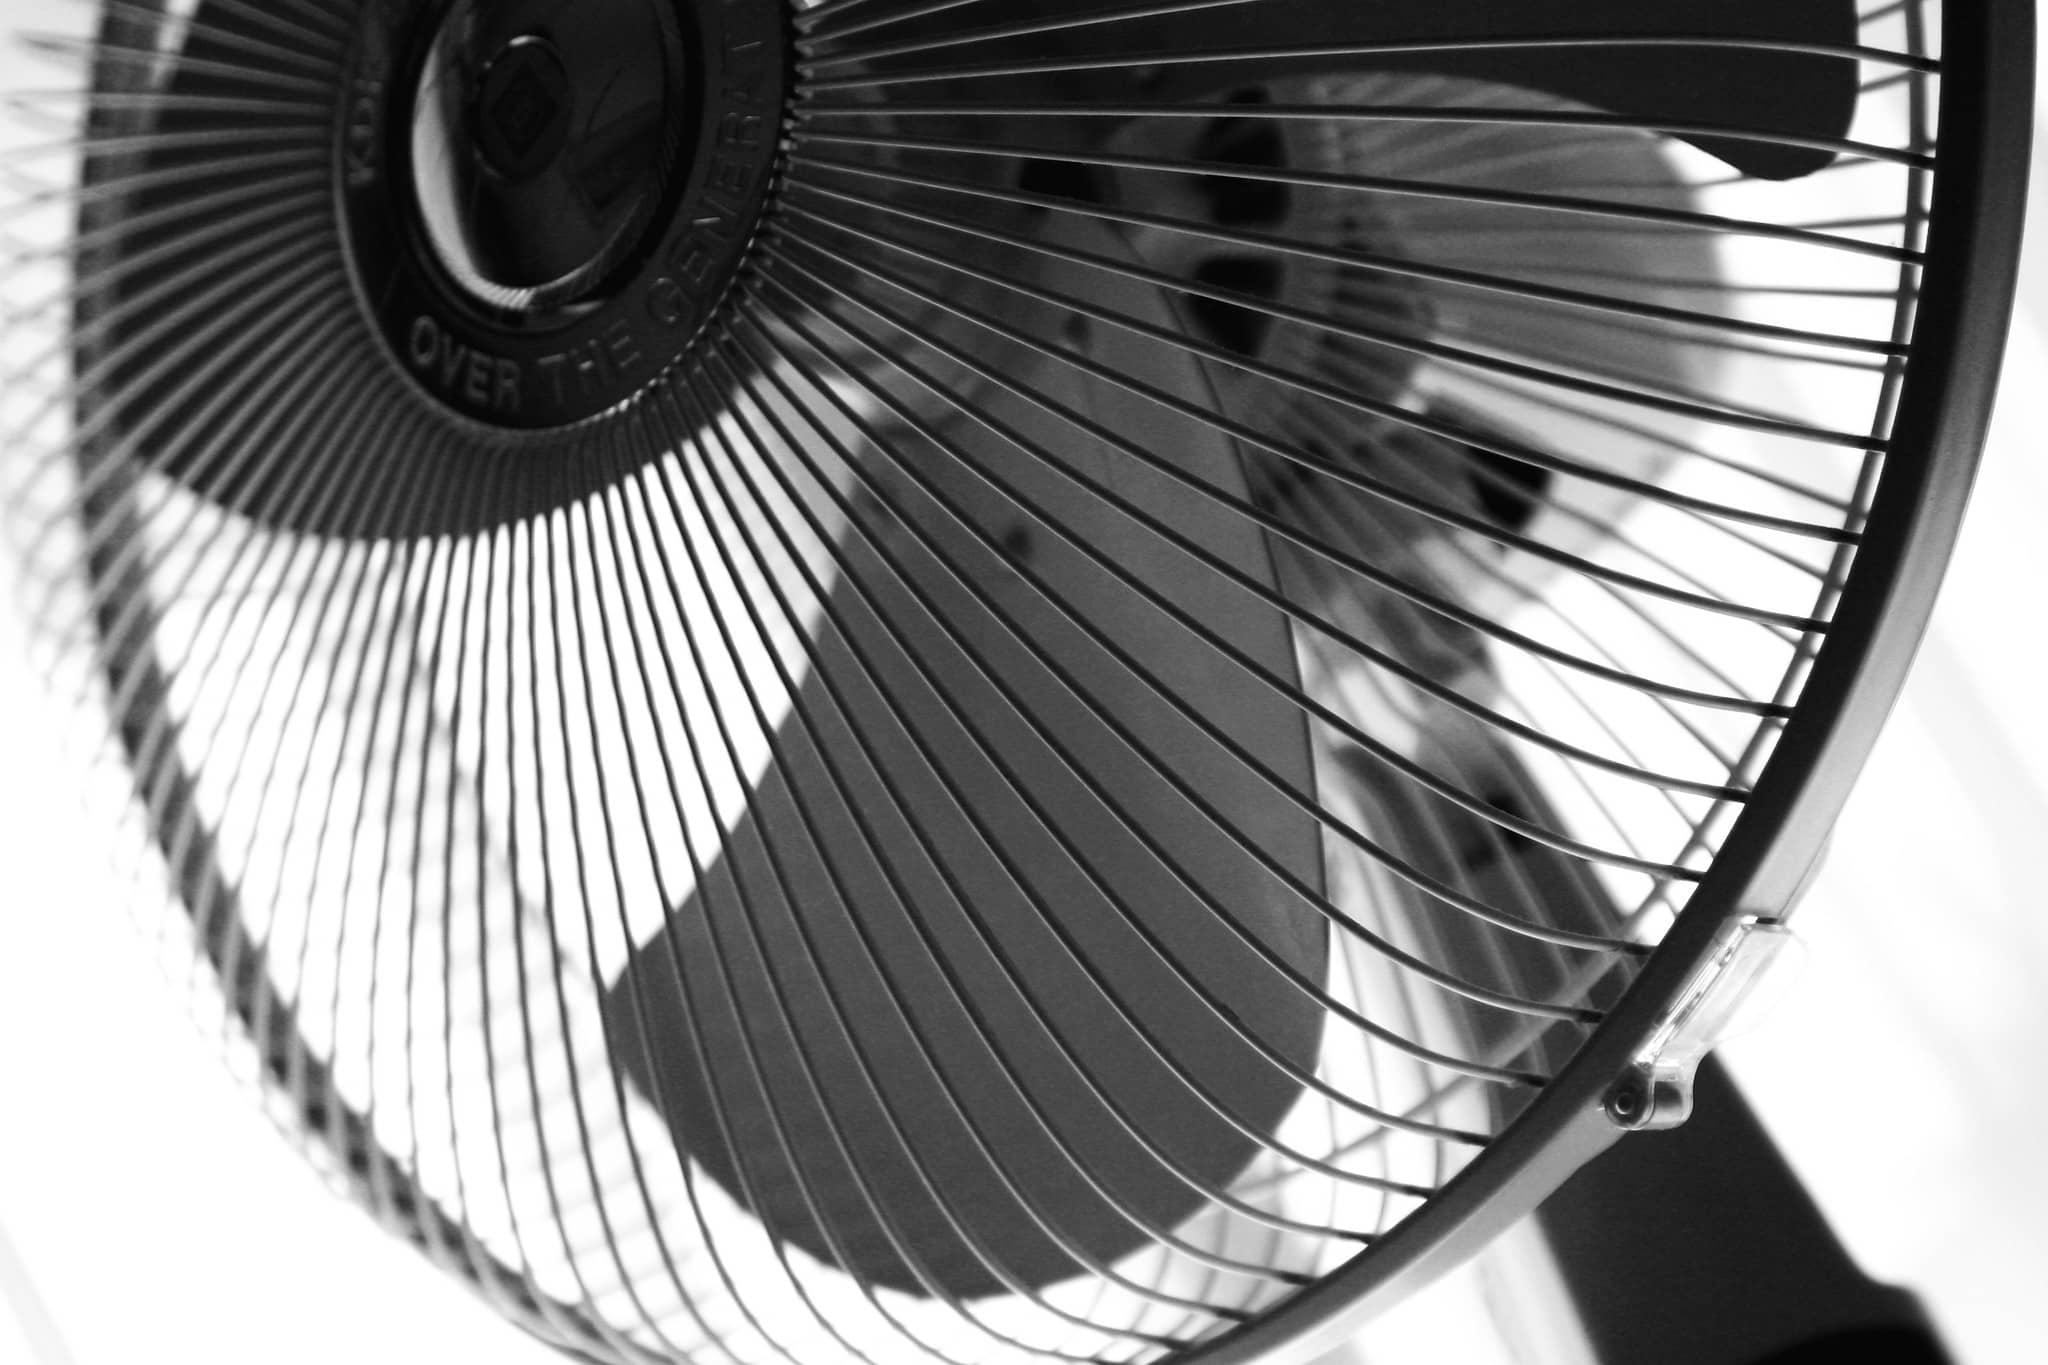 fan in black and white